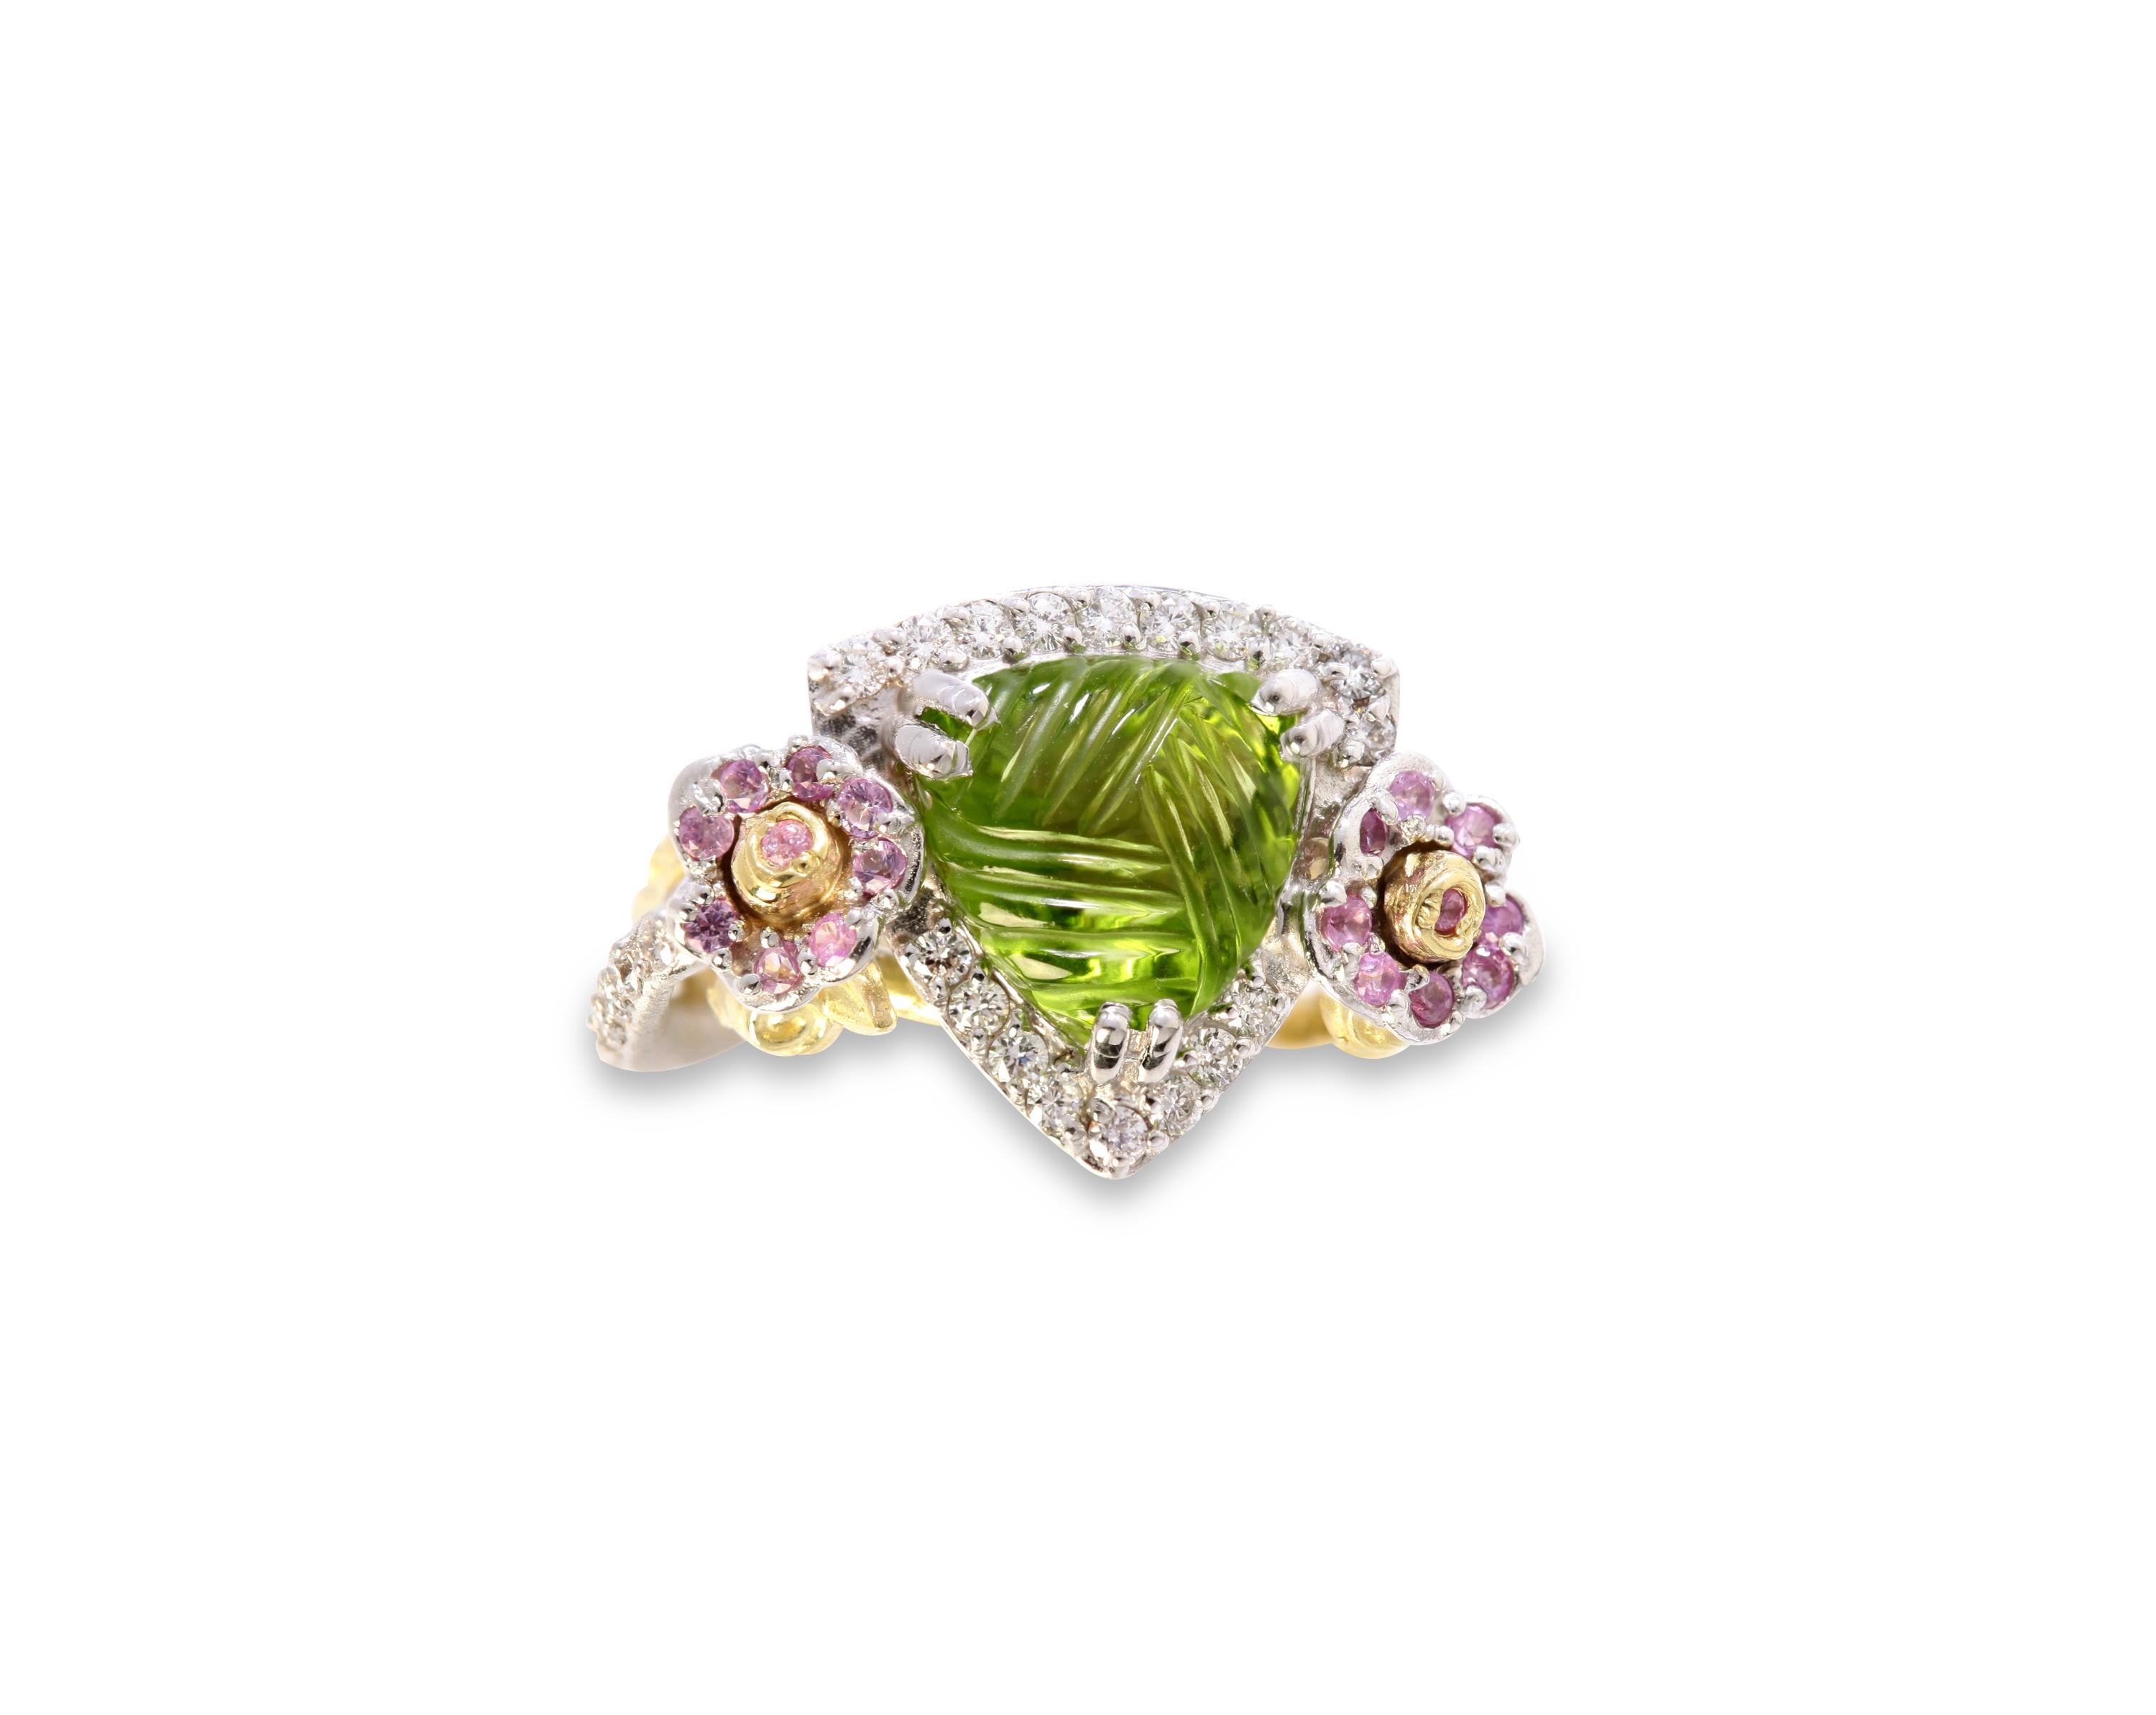 IF YOU ARE REALLY INTERESTED, CONTACT US WITH ANY REASONABLE OFFER. WE WILL TRY OUR BEST TO MAKE YOU HAPPY!

18K Two-Tone Yellow White and Diamond Floral Rose Ring with Pink Sapphires & Special Cut Peridot by Stambolian

This masterpiece by